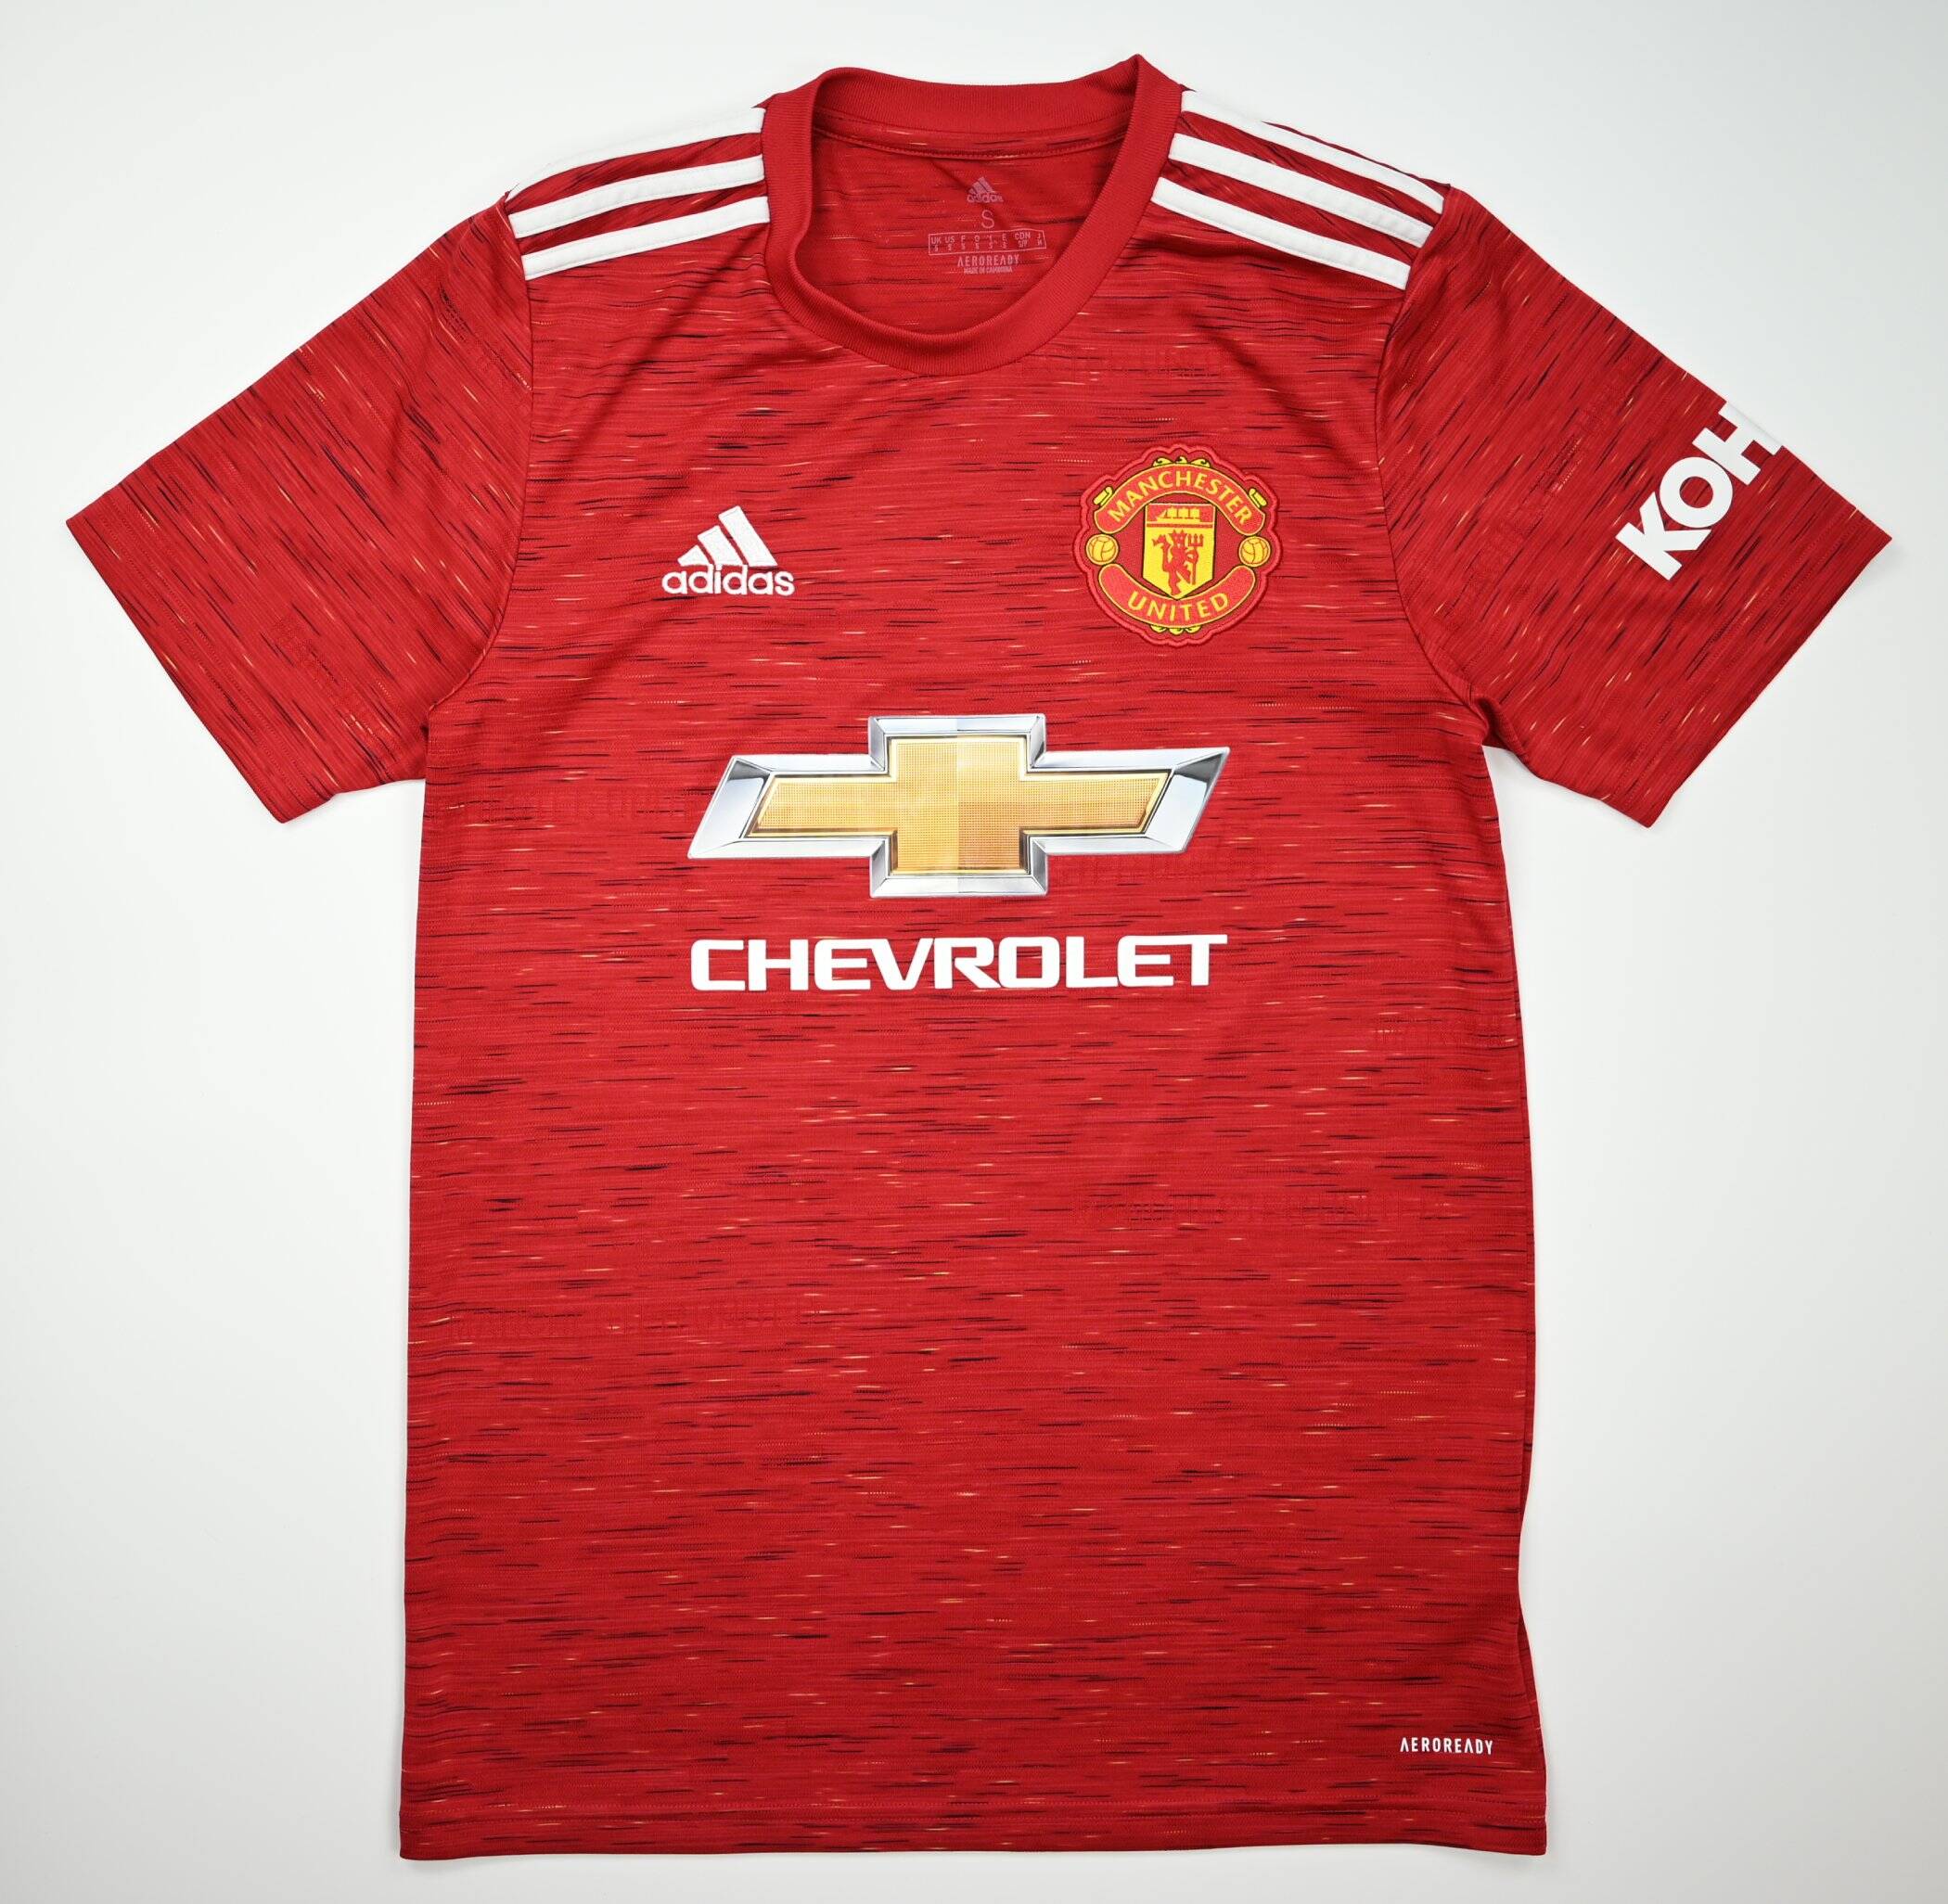 manchester united jersey number 21